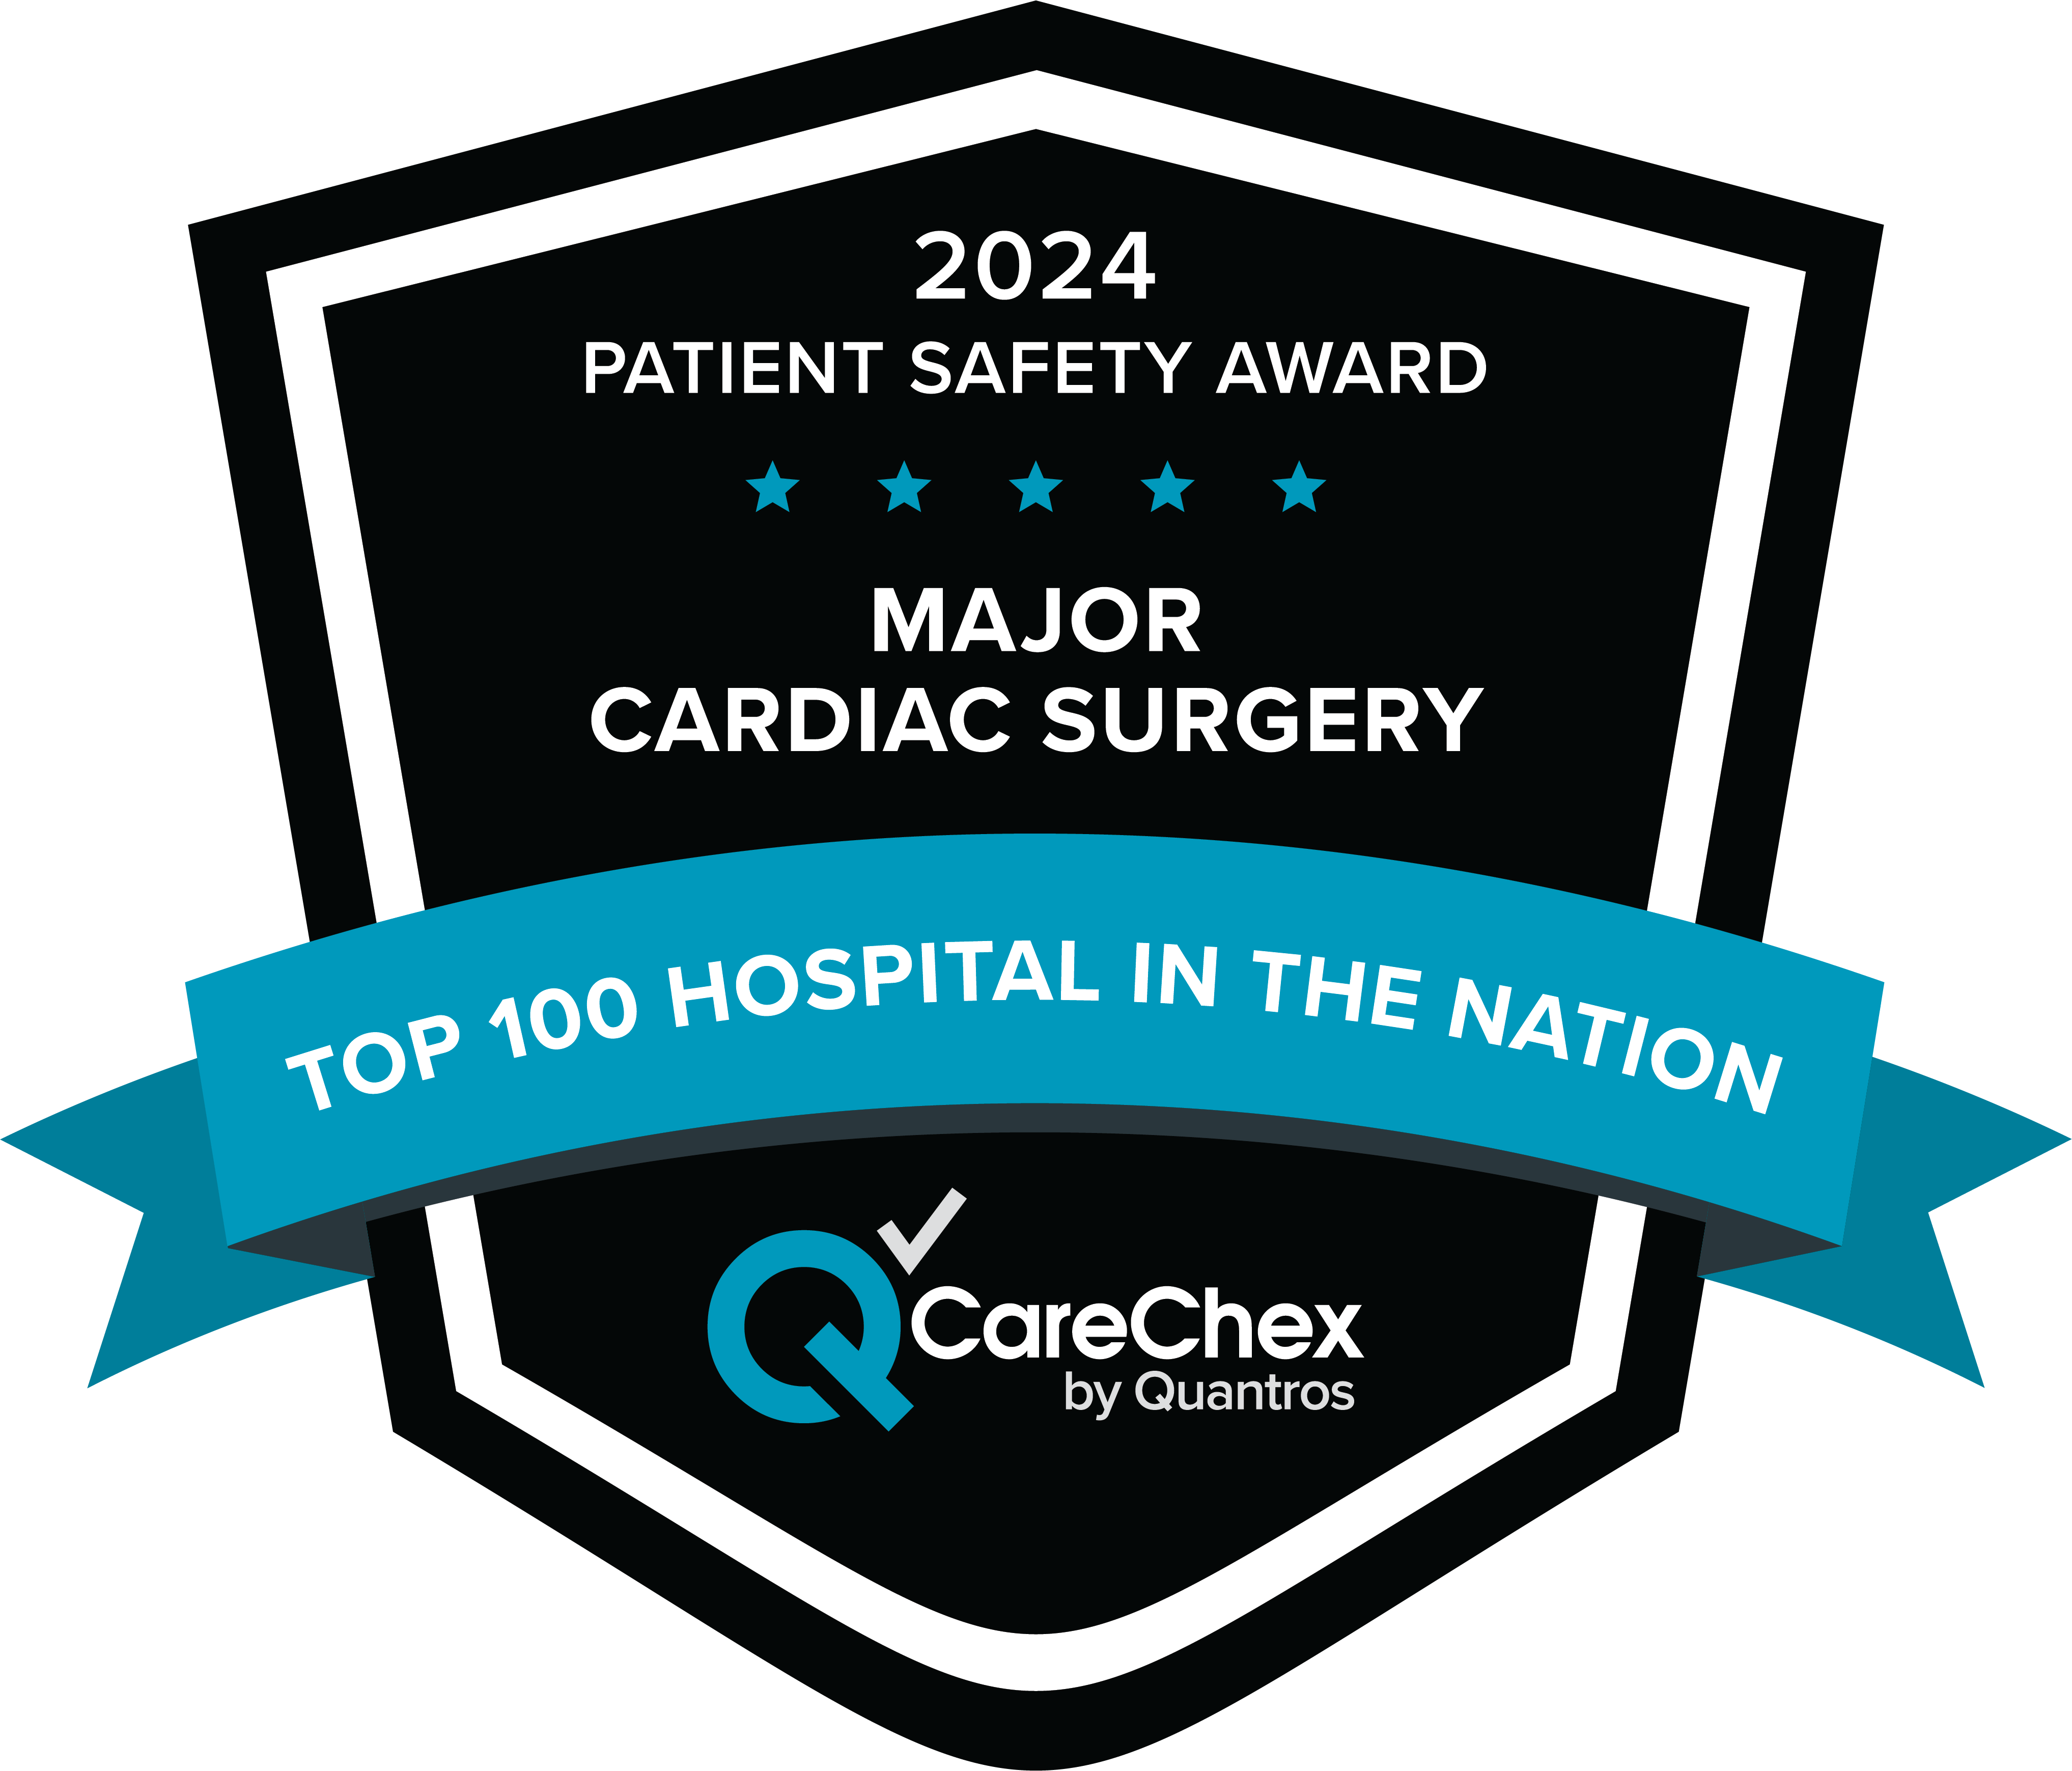 Awards badge for Top 100 Hospital in the Nation for Patient Safety in Major Cardiac Surgery – 2024 CareChex by Quantros